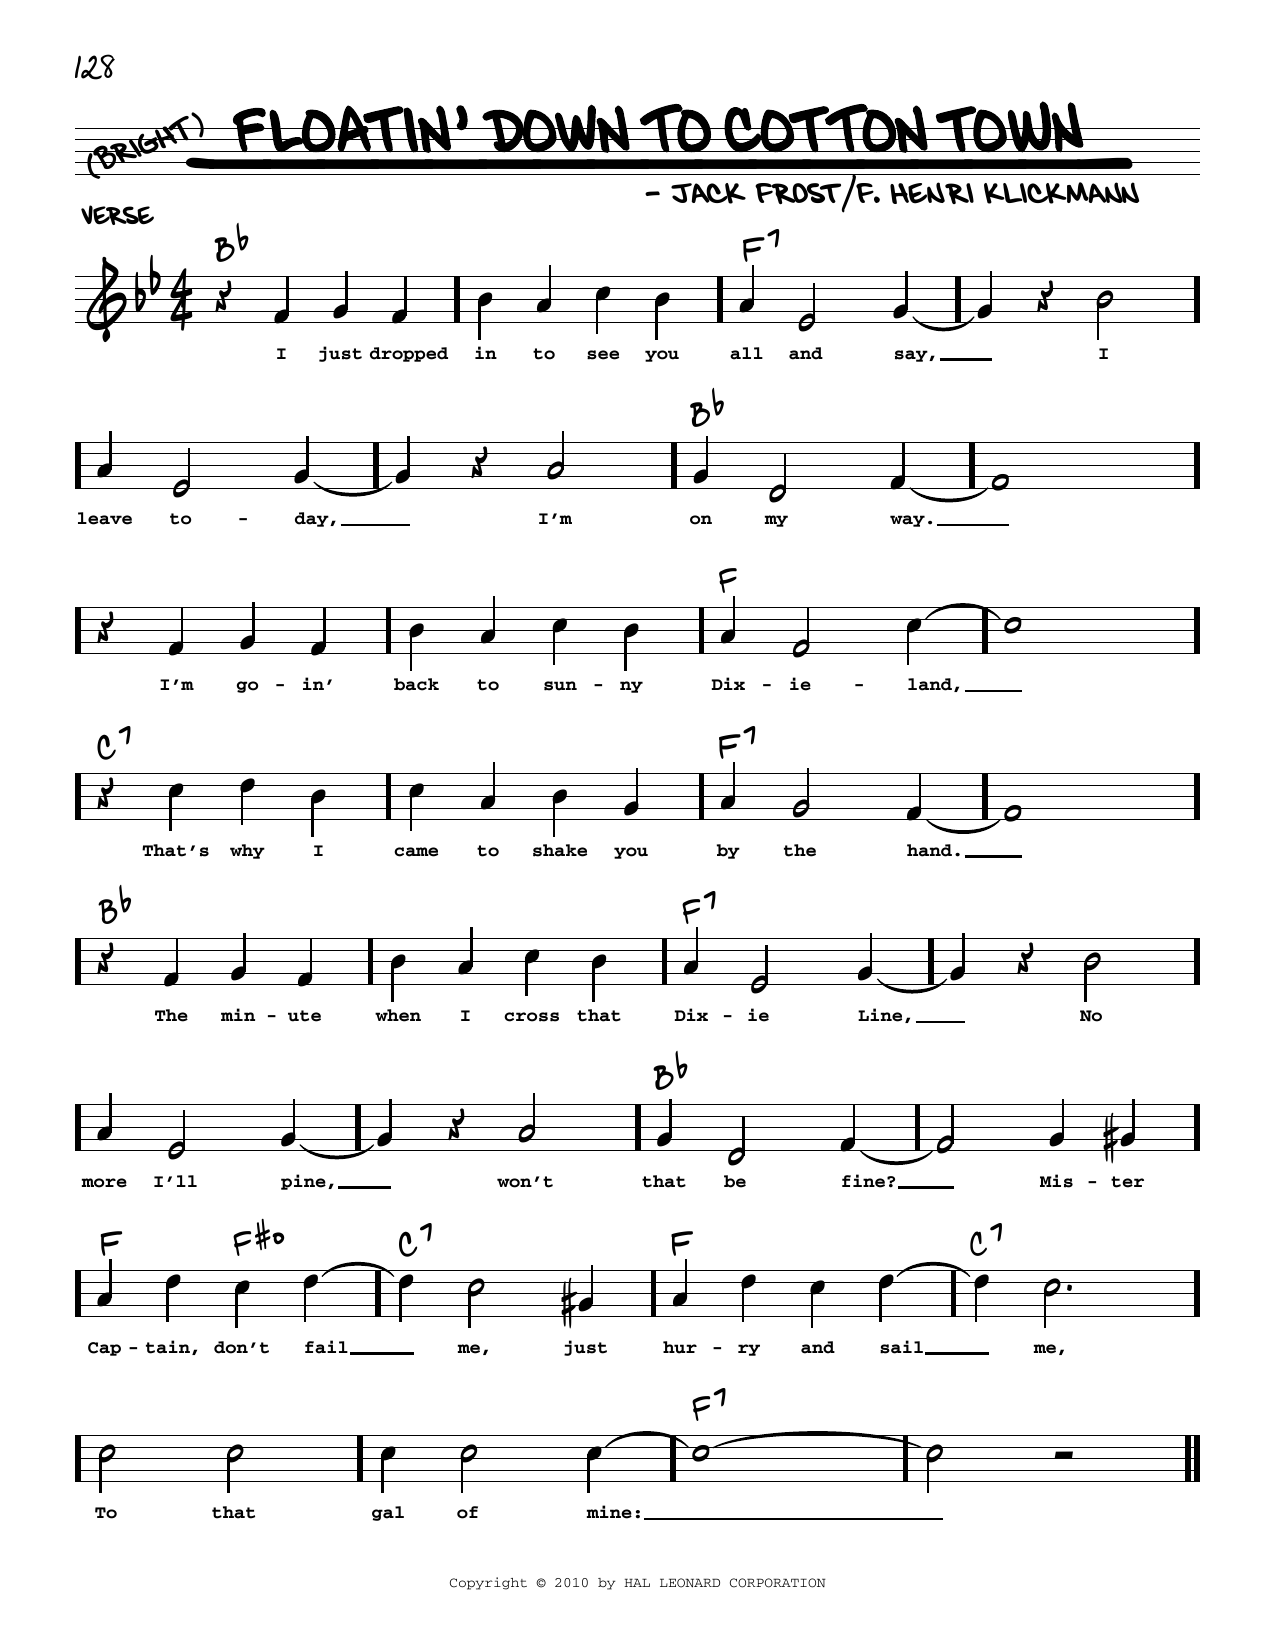 Download Jack Frost Floatin' Down To Cotton Town (arr. Robe Sheet Music